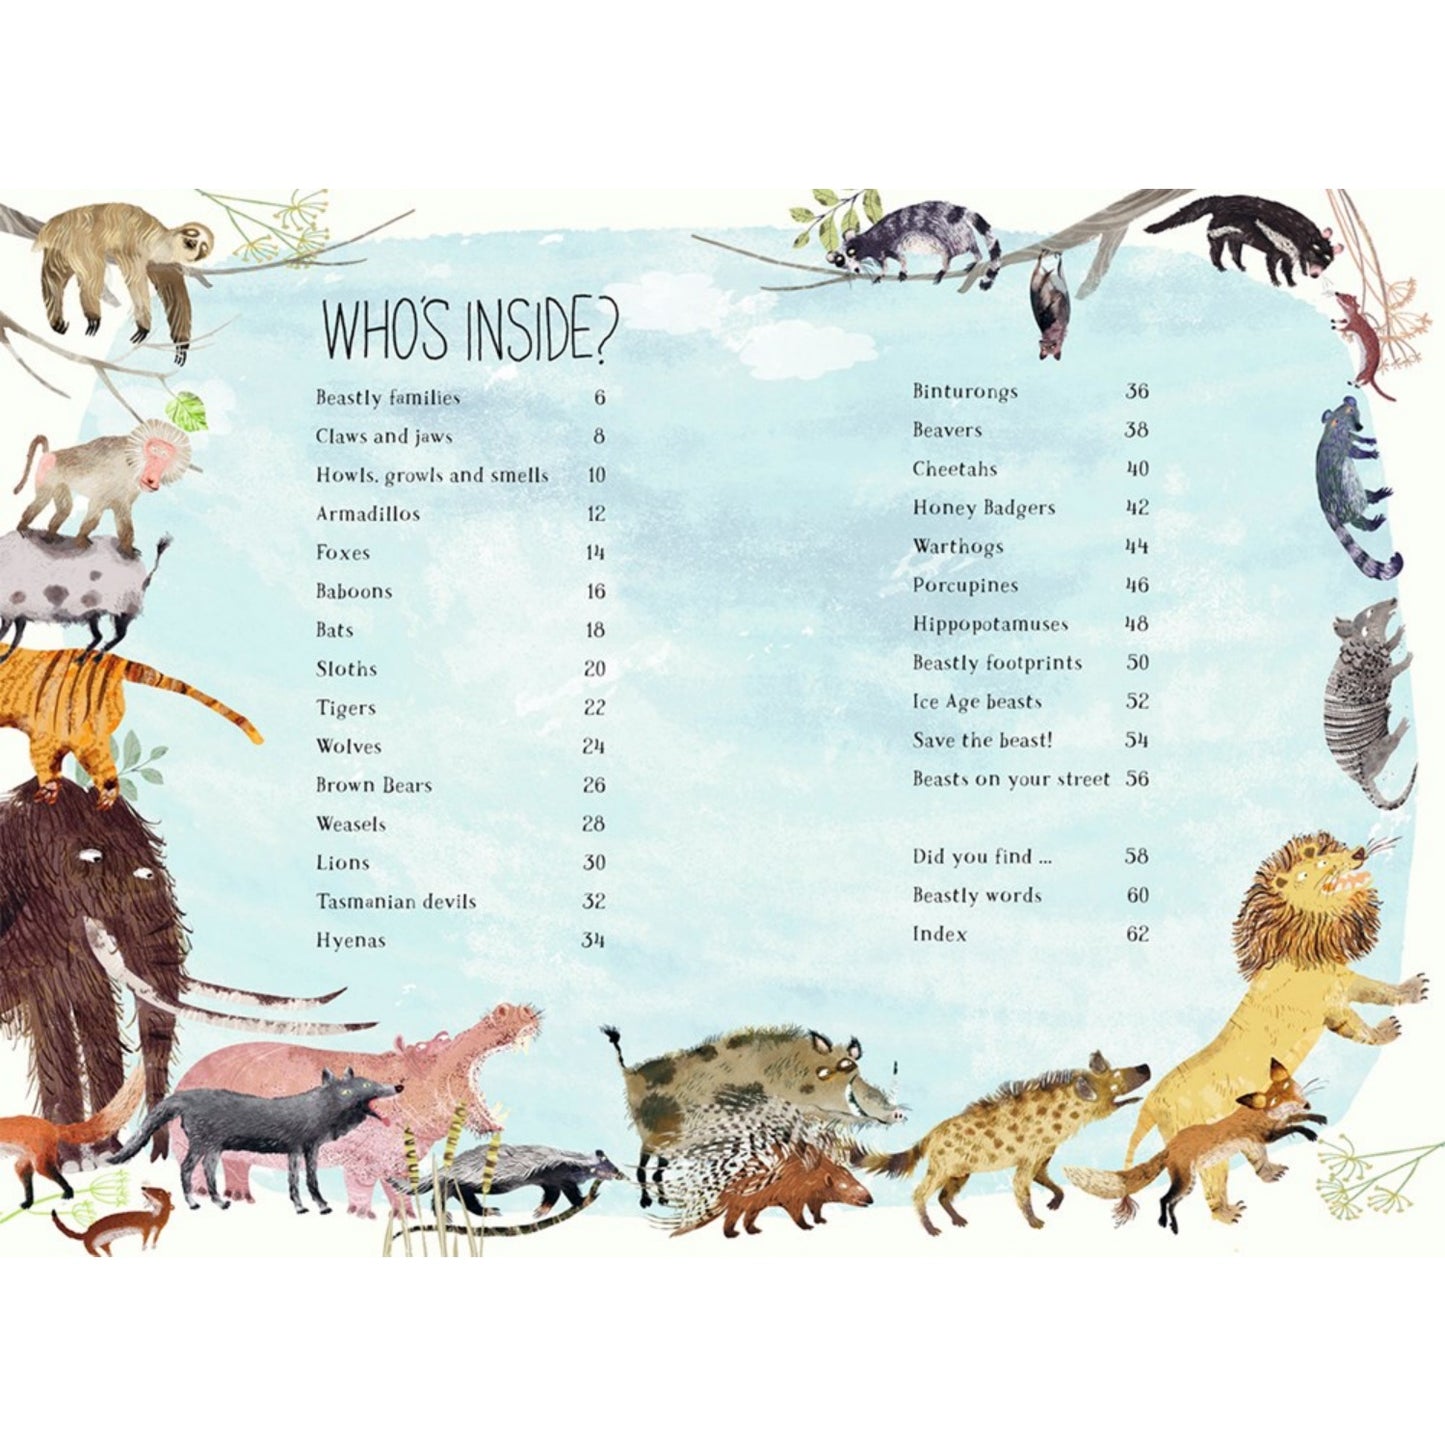 The Big Book of Beasts | Children's Picture Book on Nature